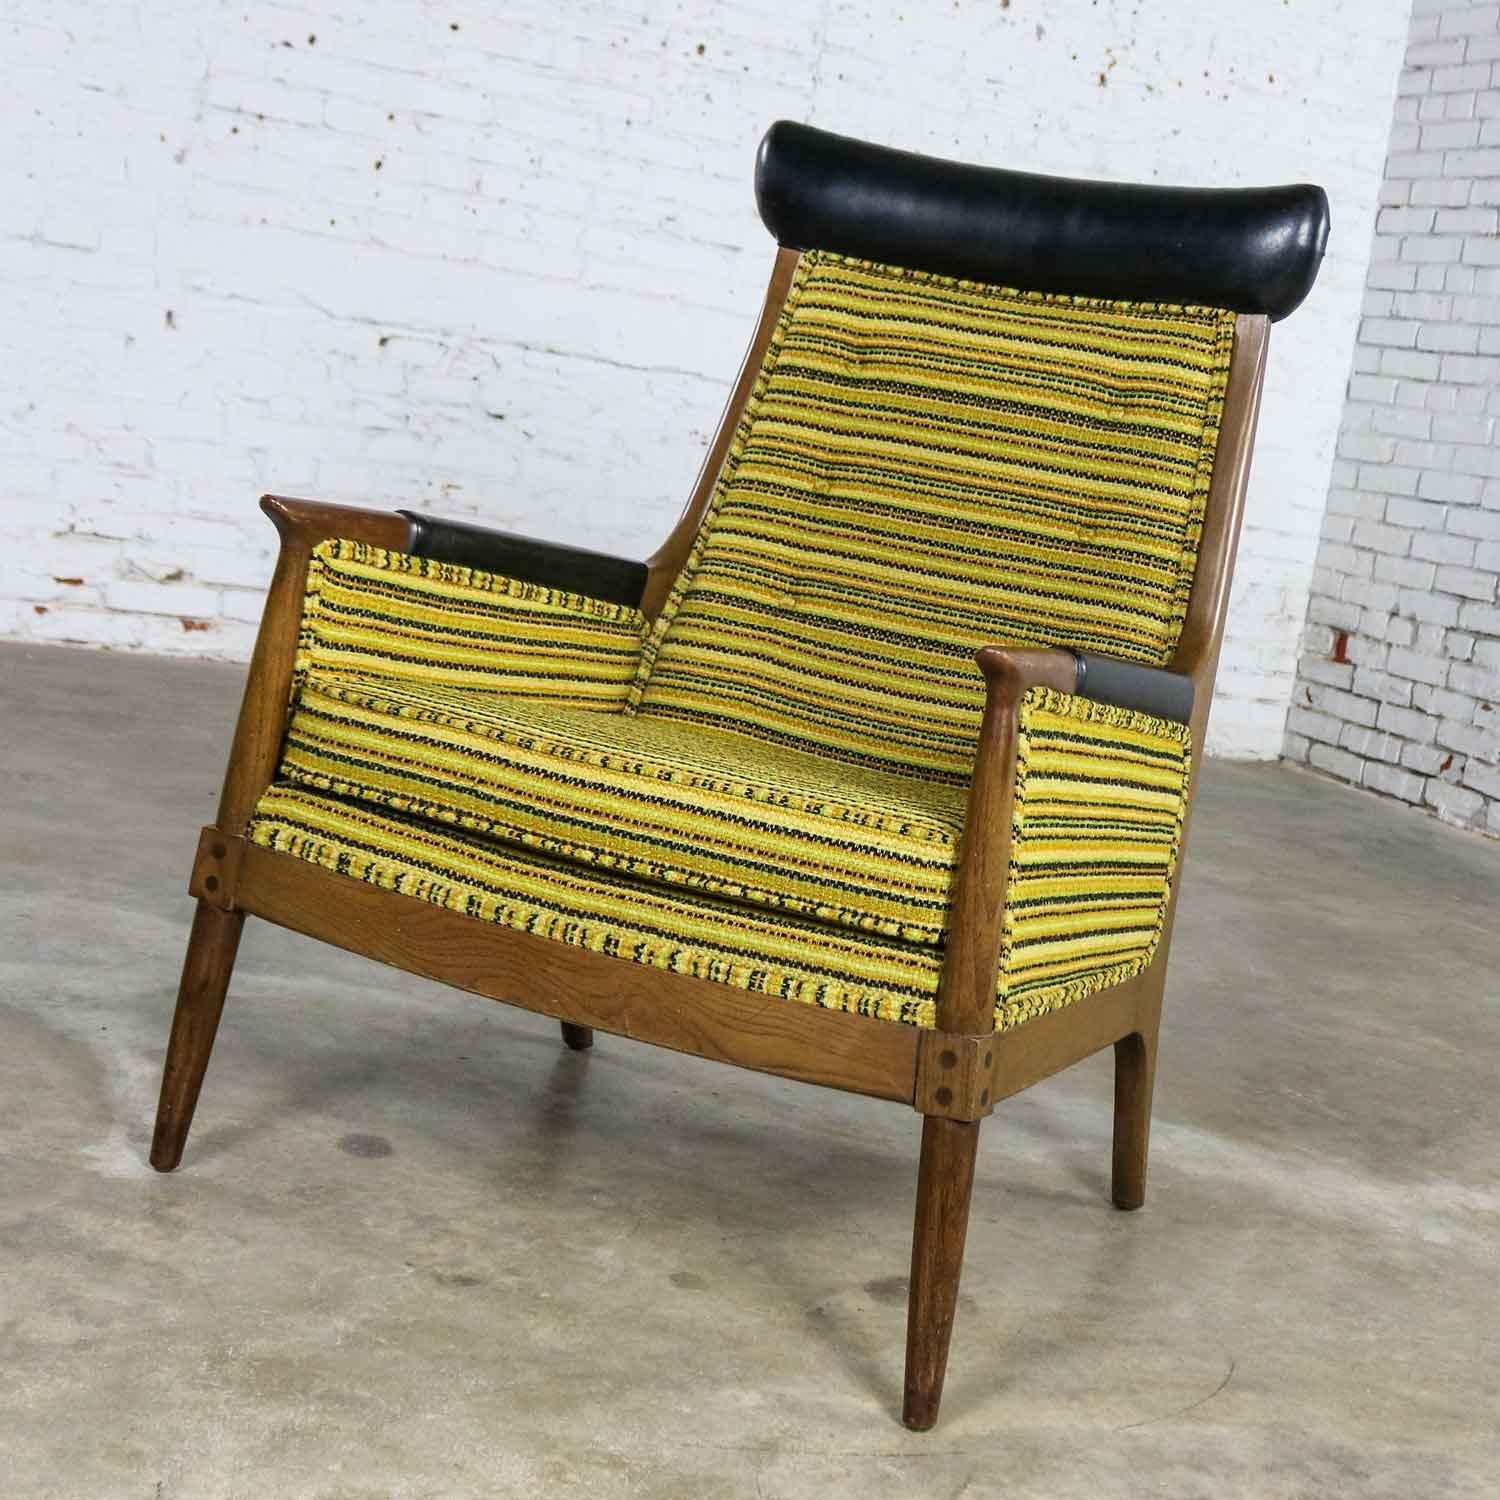 black and gold striped upholstery fabric